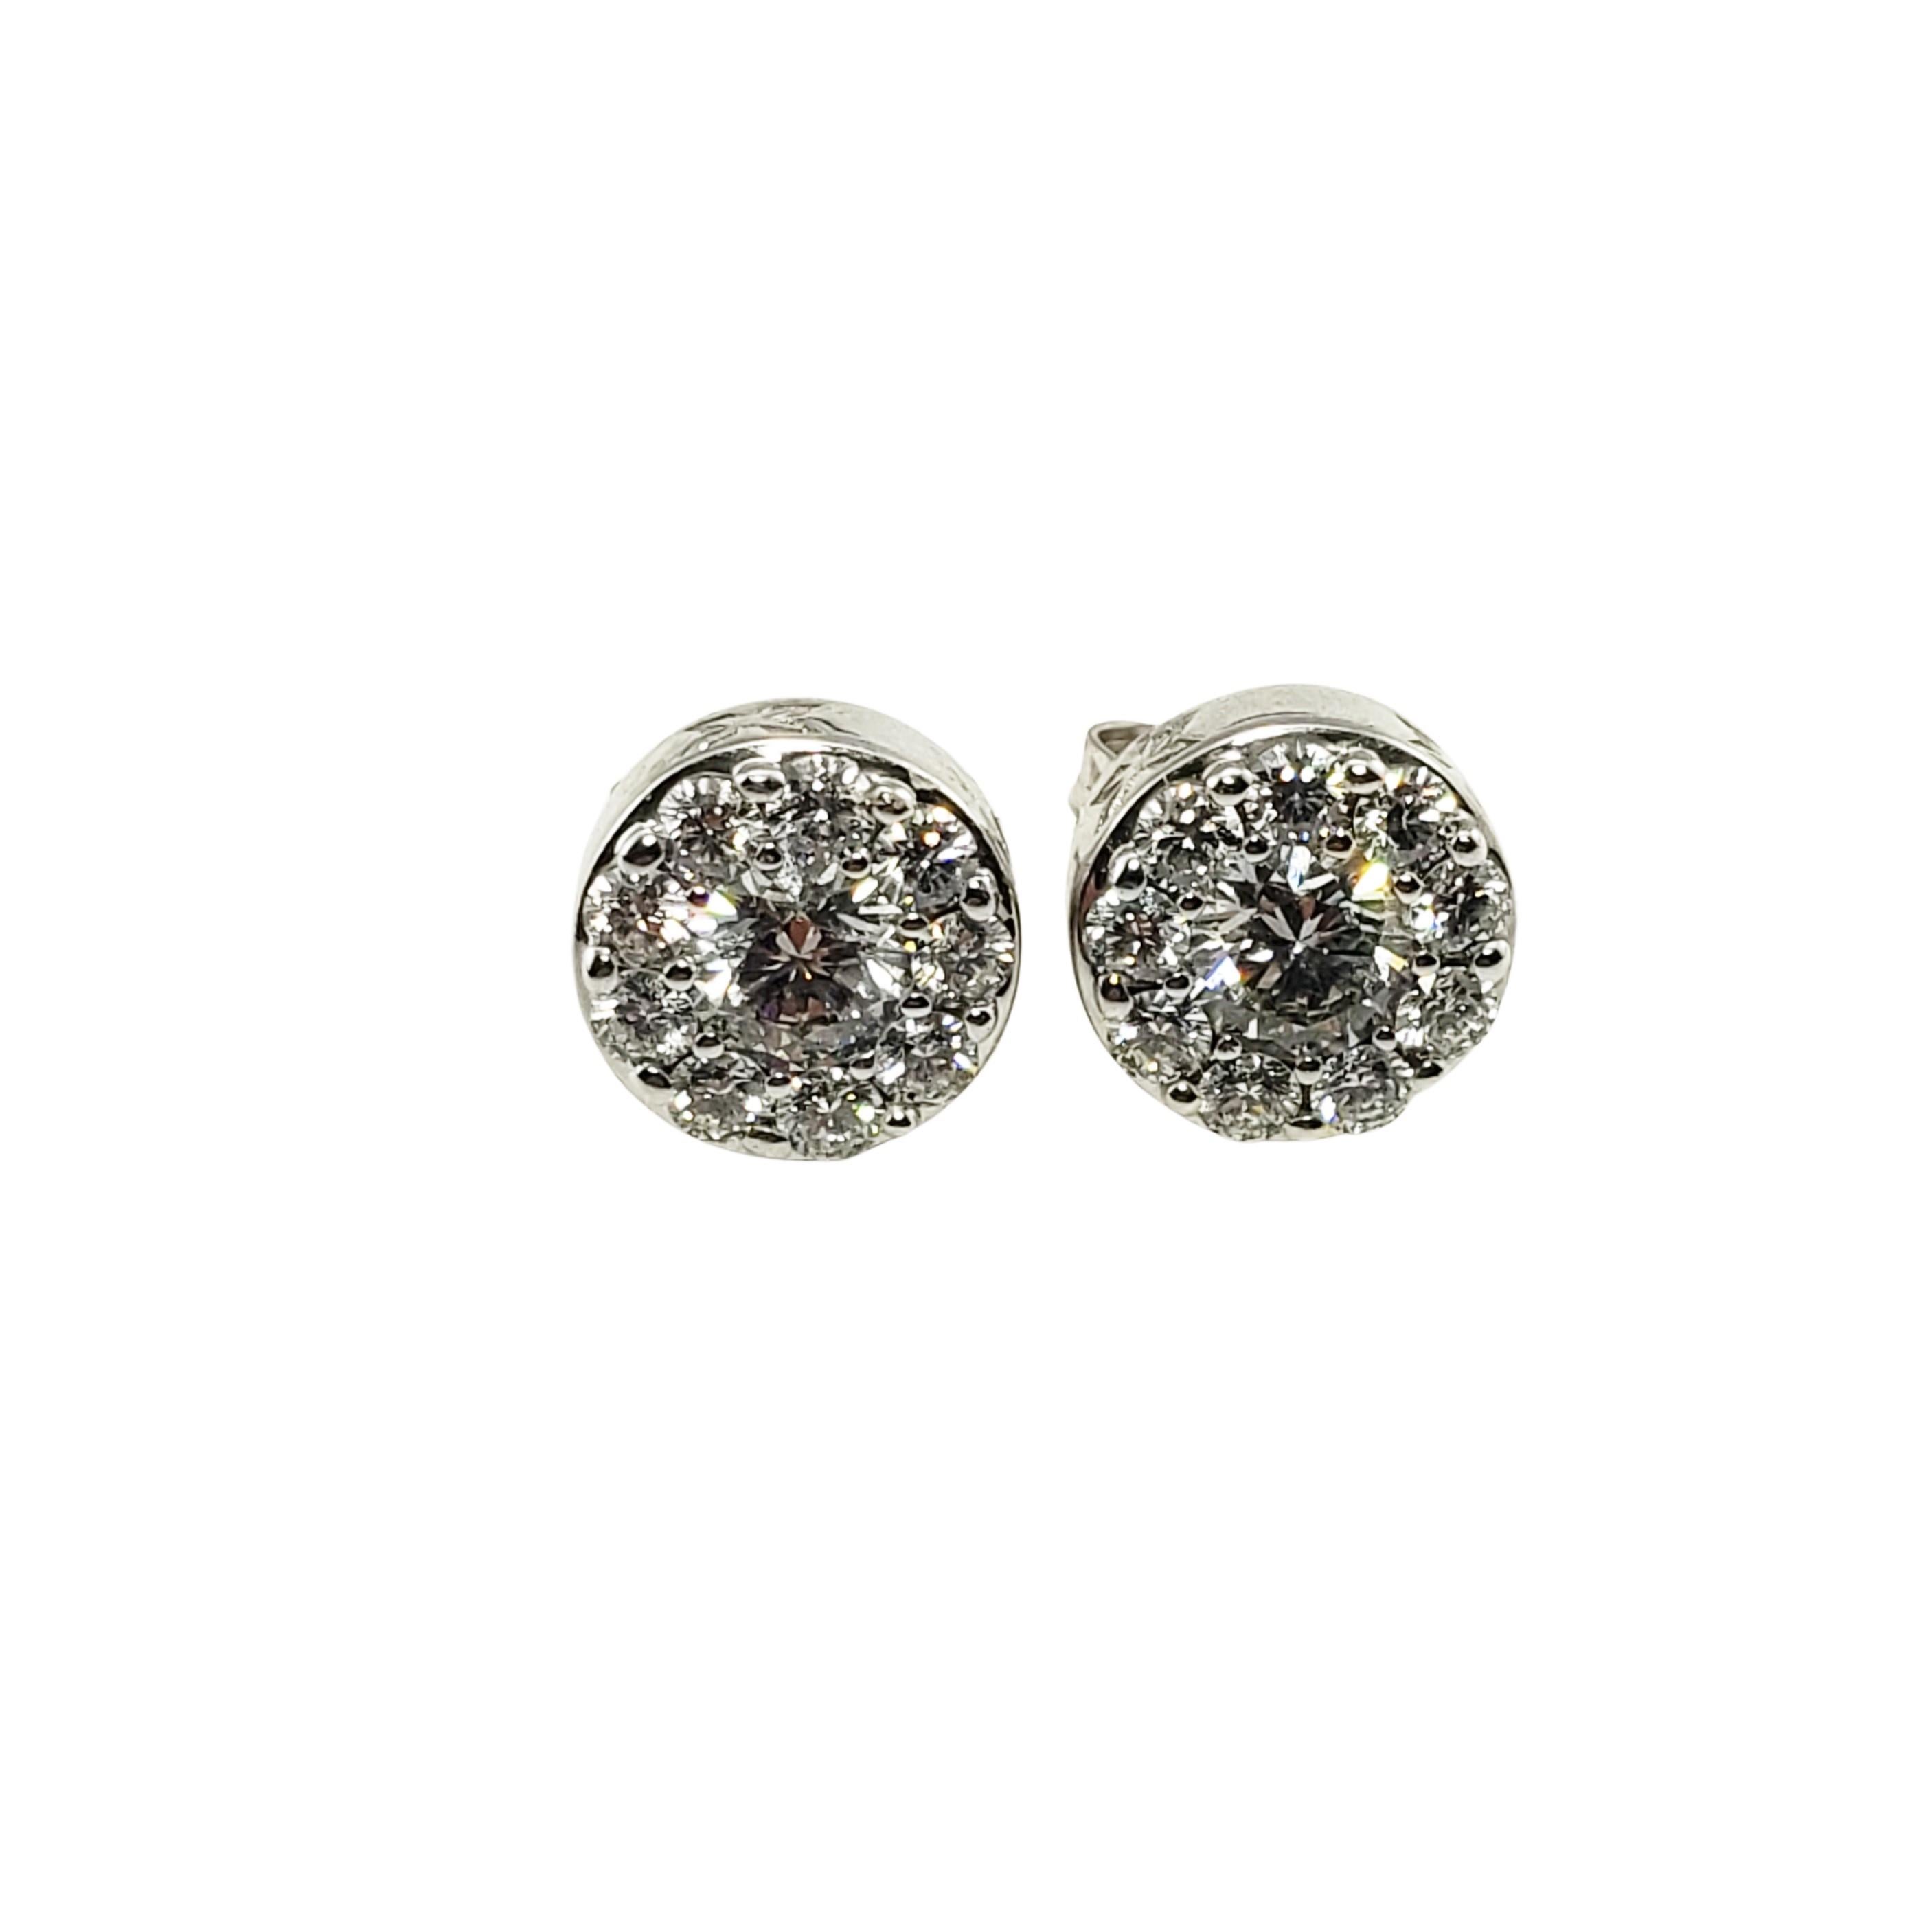 14 Karat White Gold and Diamond Earrings-

These sparkling stud earrings each feature 20 round brilliant cut diamonds set in classic 14K white gold.  Push back closures.

Total diamond weight: 1.47 ct.

Diamond color: H-K

Diamond clarity: